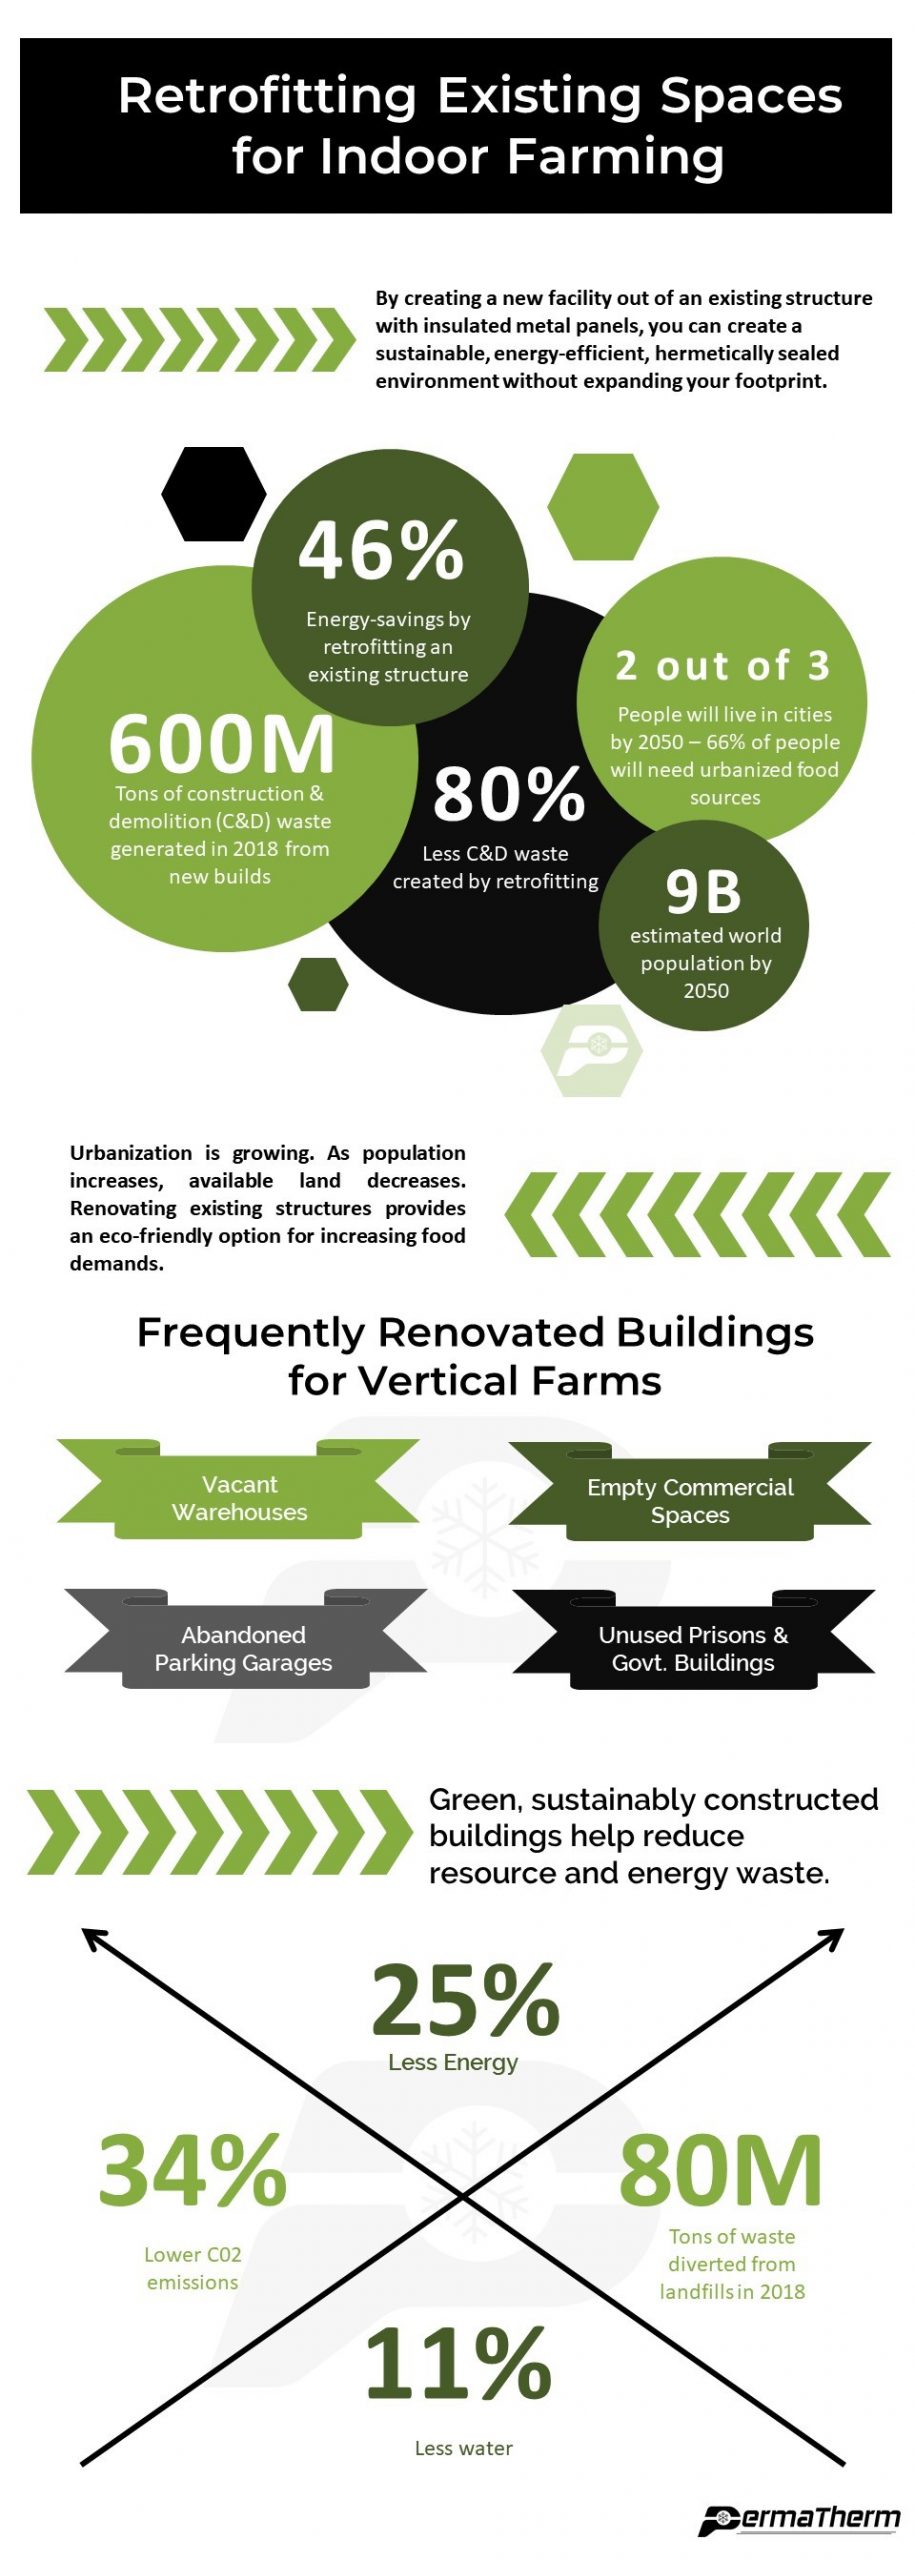 Indoor Farming and Retrofitting Renovating an Existing Building